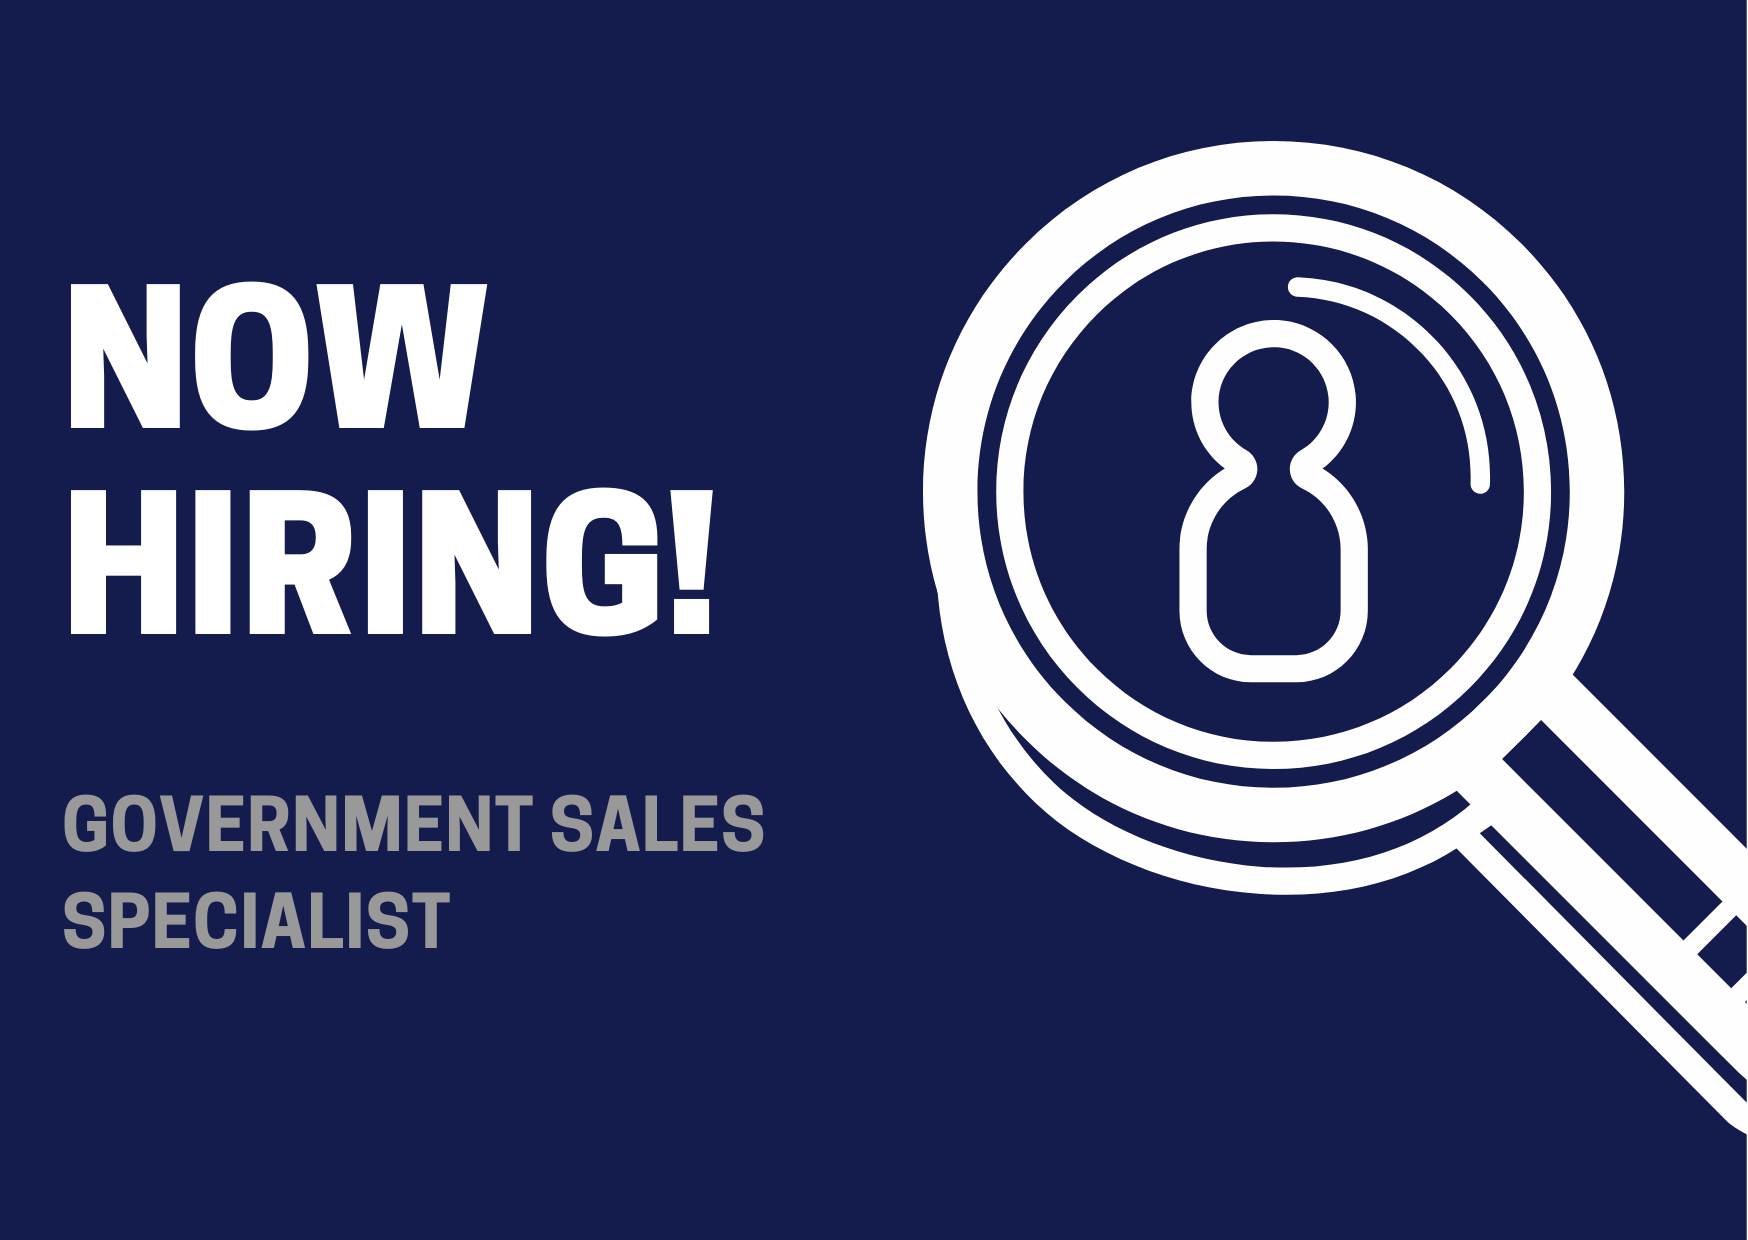 Now hiring Government Sales Specialist